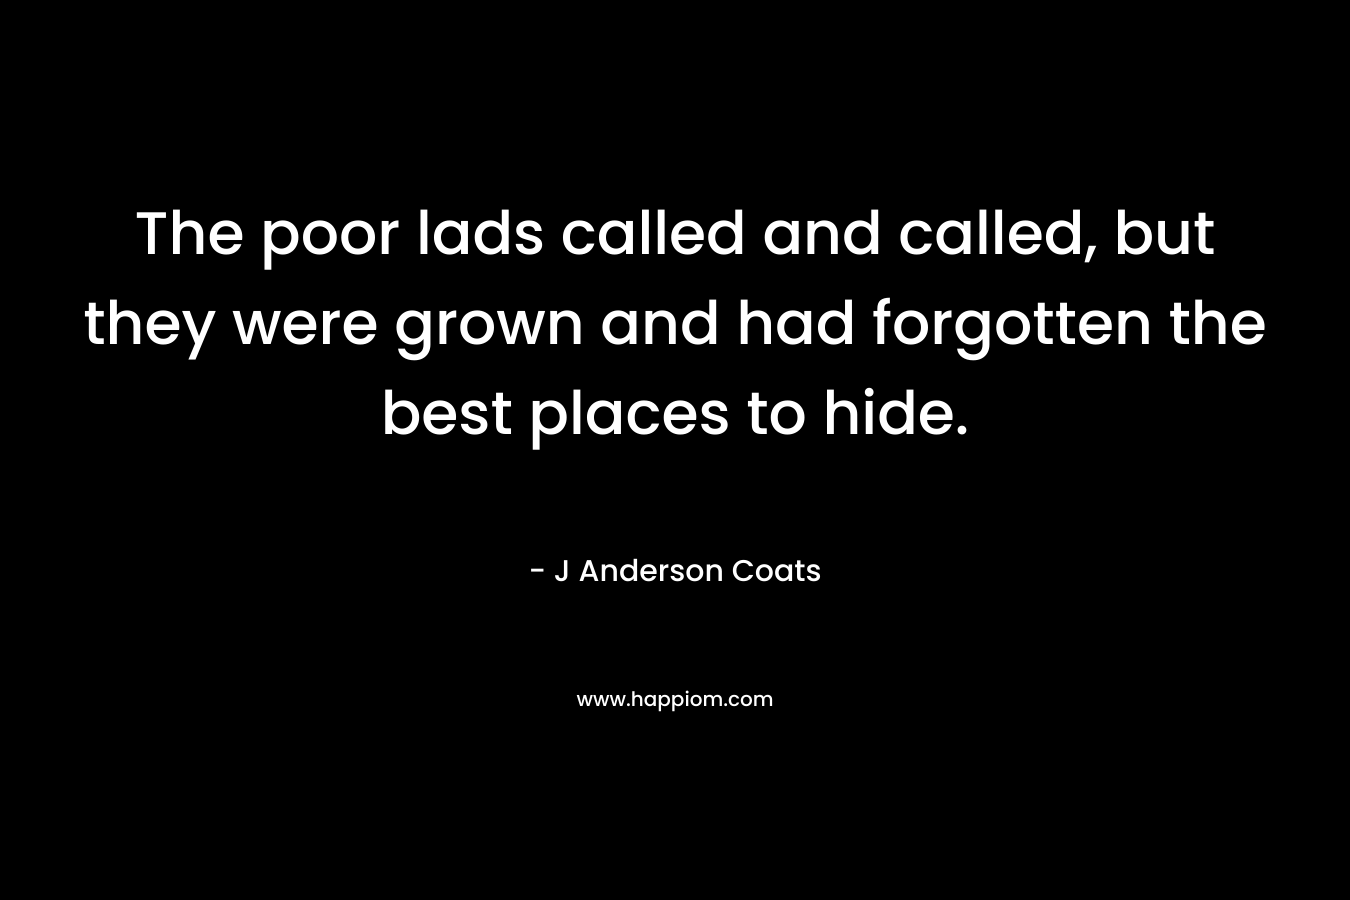 The poor lads called and called, but they were grown and had forgotten the best places to hide. – J Anderson Coats